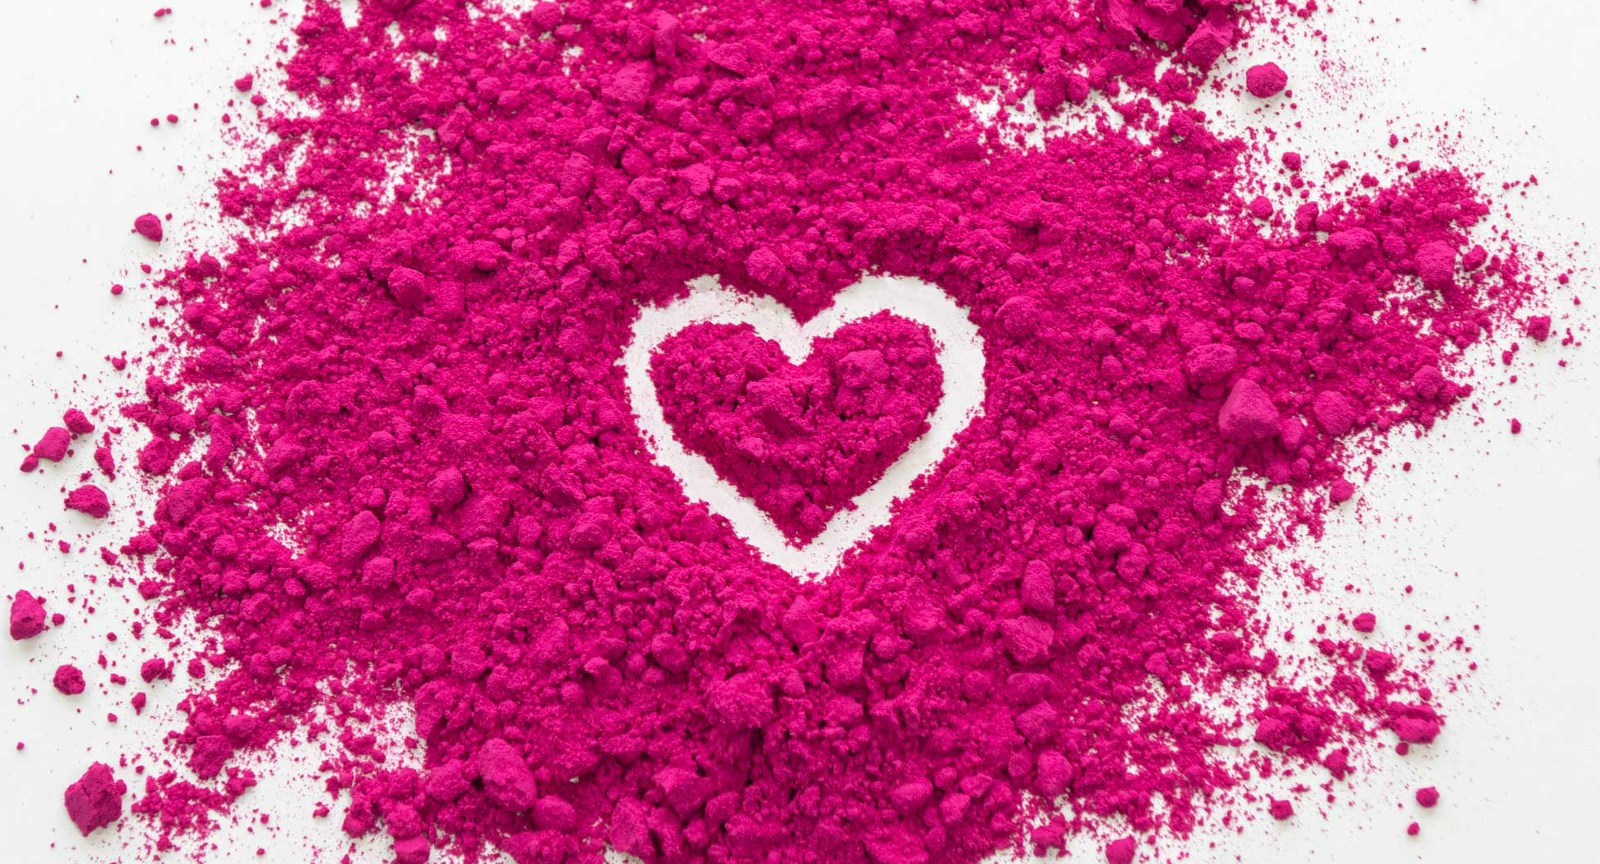 Magenta Rose - one of over 70 pigments in the Coloured Earth Pigment Range